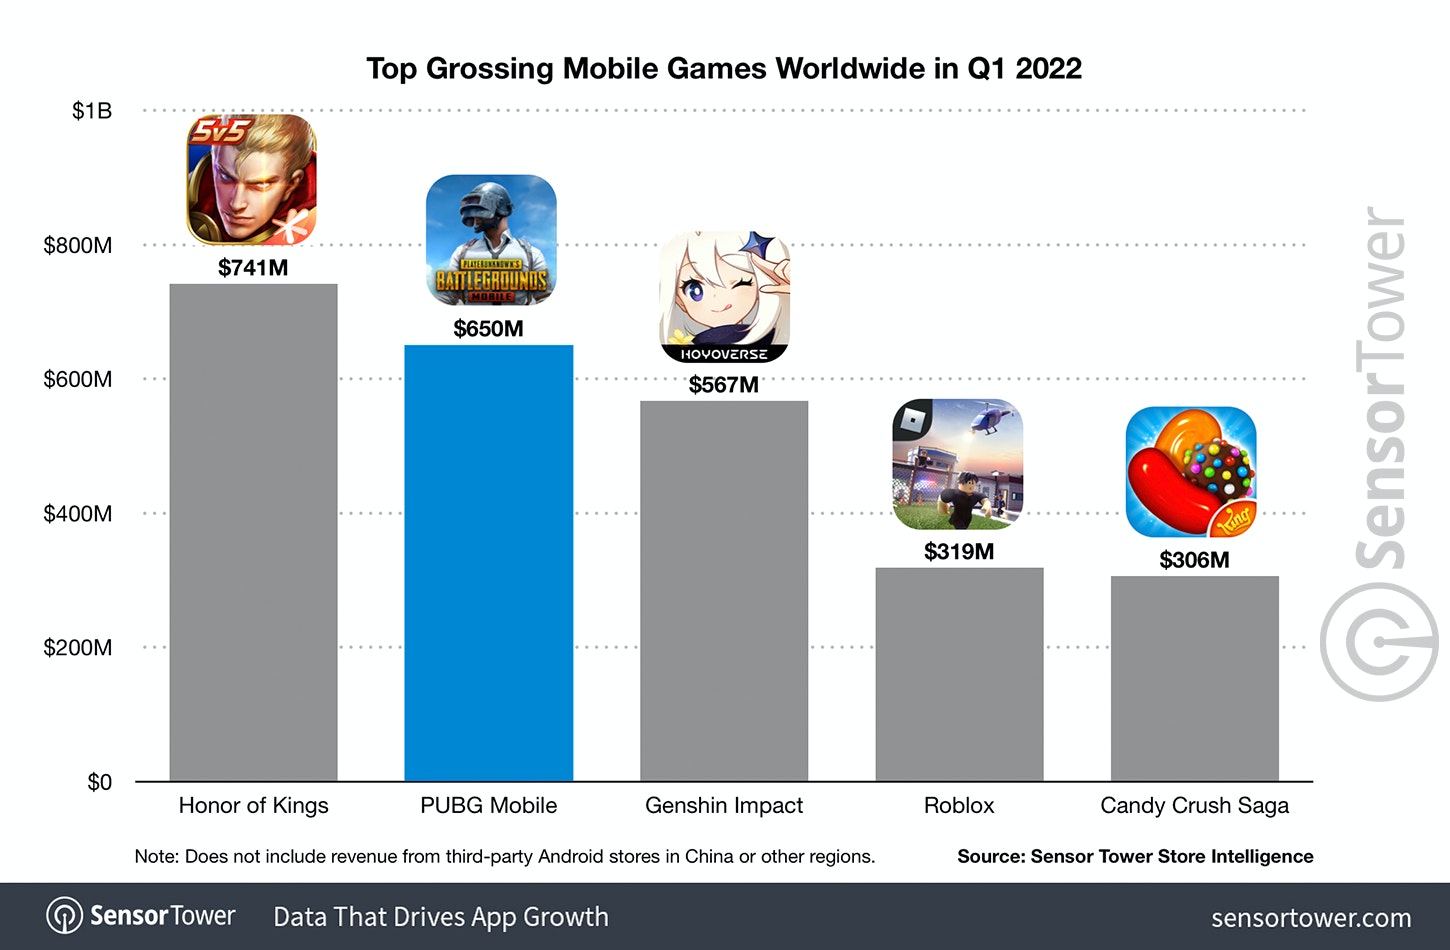 Top grossing mobile games worldwide Q1 2022